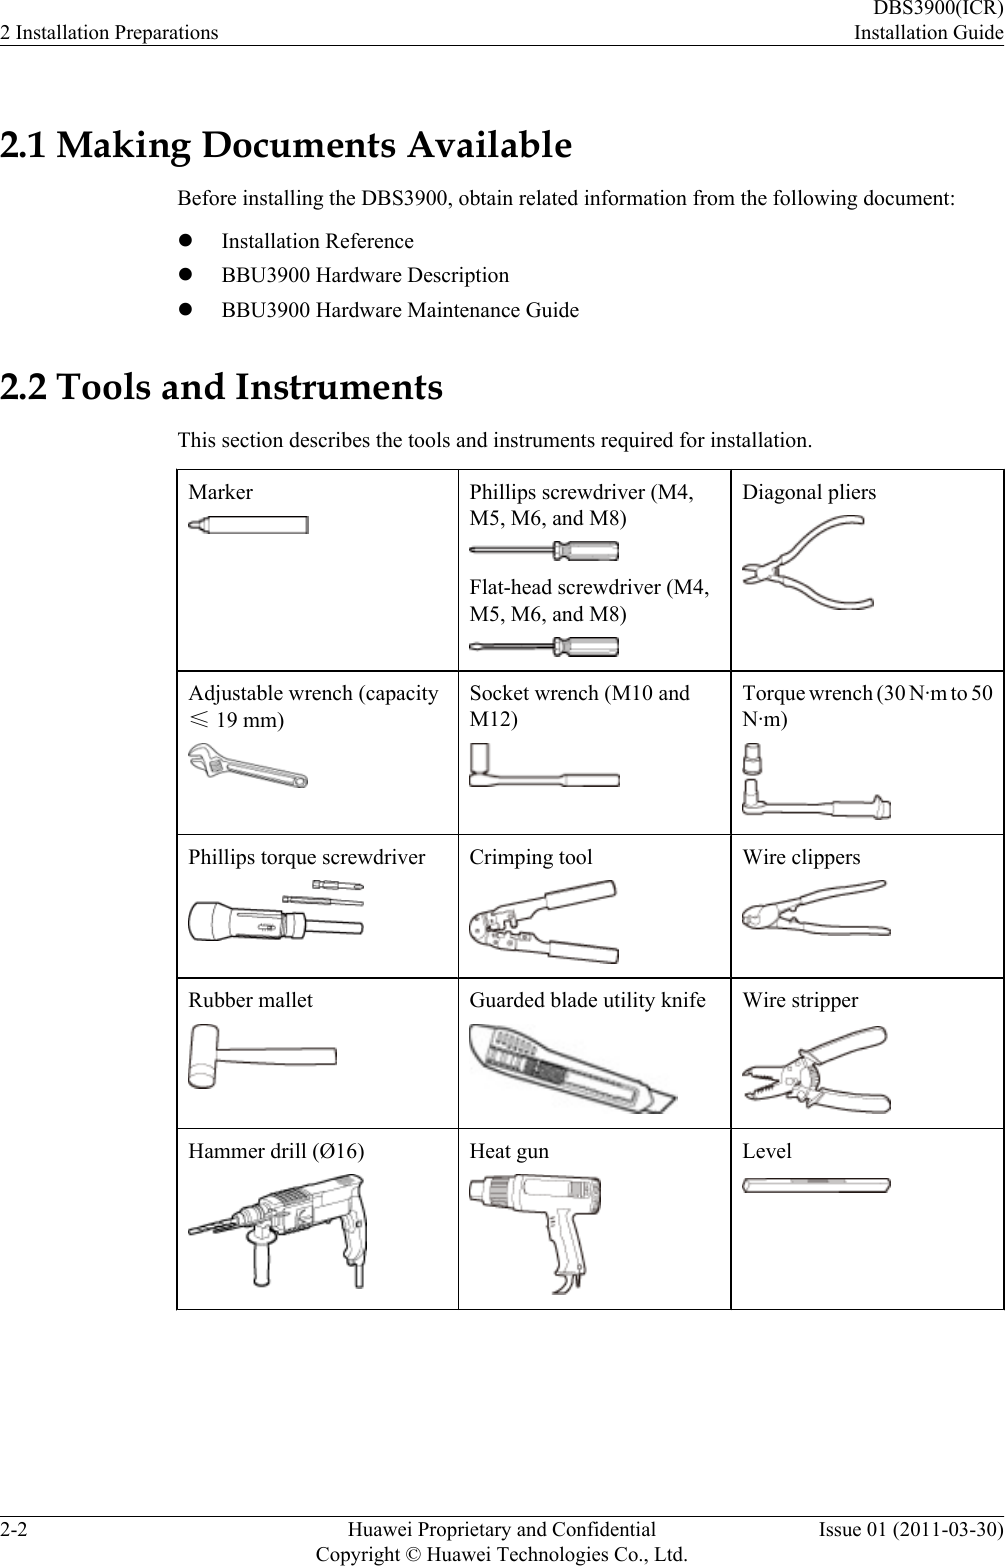 2.1 Making Documents AvailableBefore installing the DBS3900, obtain related information from the following document:lInstallation ReferencelBBU3900 Hardware DescriptionlBBU3900 Hardware Maintenance Guide2.2 Tools and InstrumentsThis section describes the tools and instruments required for installation.Marker Phillips screwdriver (M4,M5, M6, and M8)Flat-head screwdriver (M4,M5, M6, and M8)Diagonal pliersAdjustable wrench (capacity≤ 19 mm)Socket wrench (M10 andM12)Torque wrench (30 N·m to 50N·m)Phillips torque screwdriver Crimping tool Wire clippersRubber mallet Guarded blade utility knife Wire stripperHammer drill (Ø16) Heat gun Level2 Installation PreparationsDBS3900(ICR)Installation Guide2-2 Huawei Proprietary and ConfidentialCopyright © Huawei Technologies Co., Ltd.Issue 01 (2011-03-30)